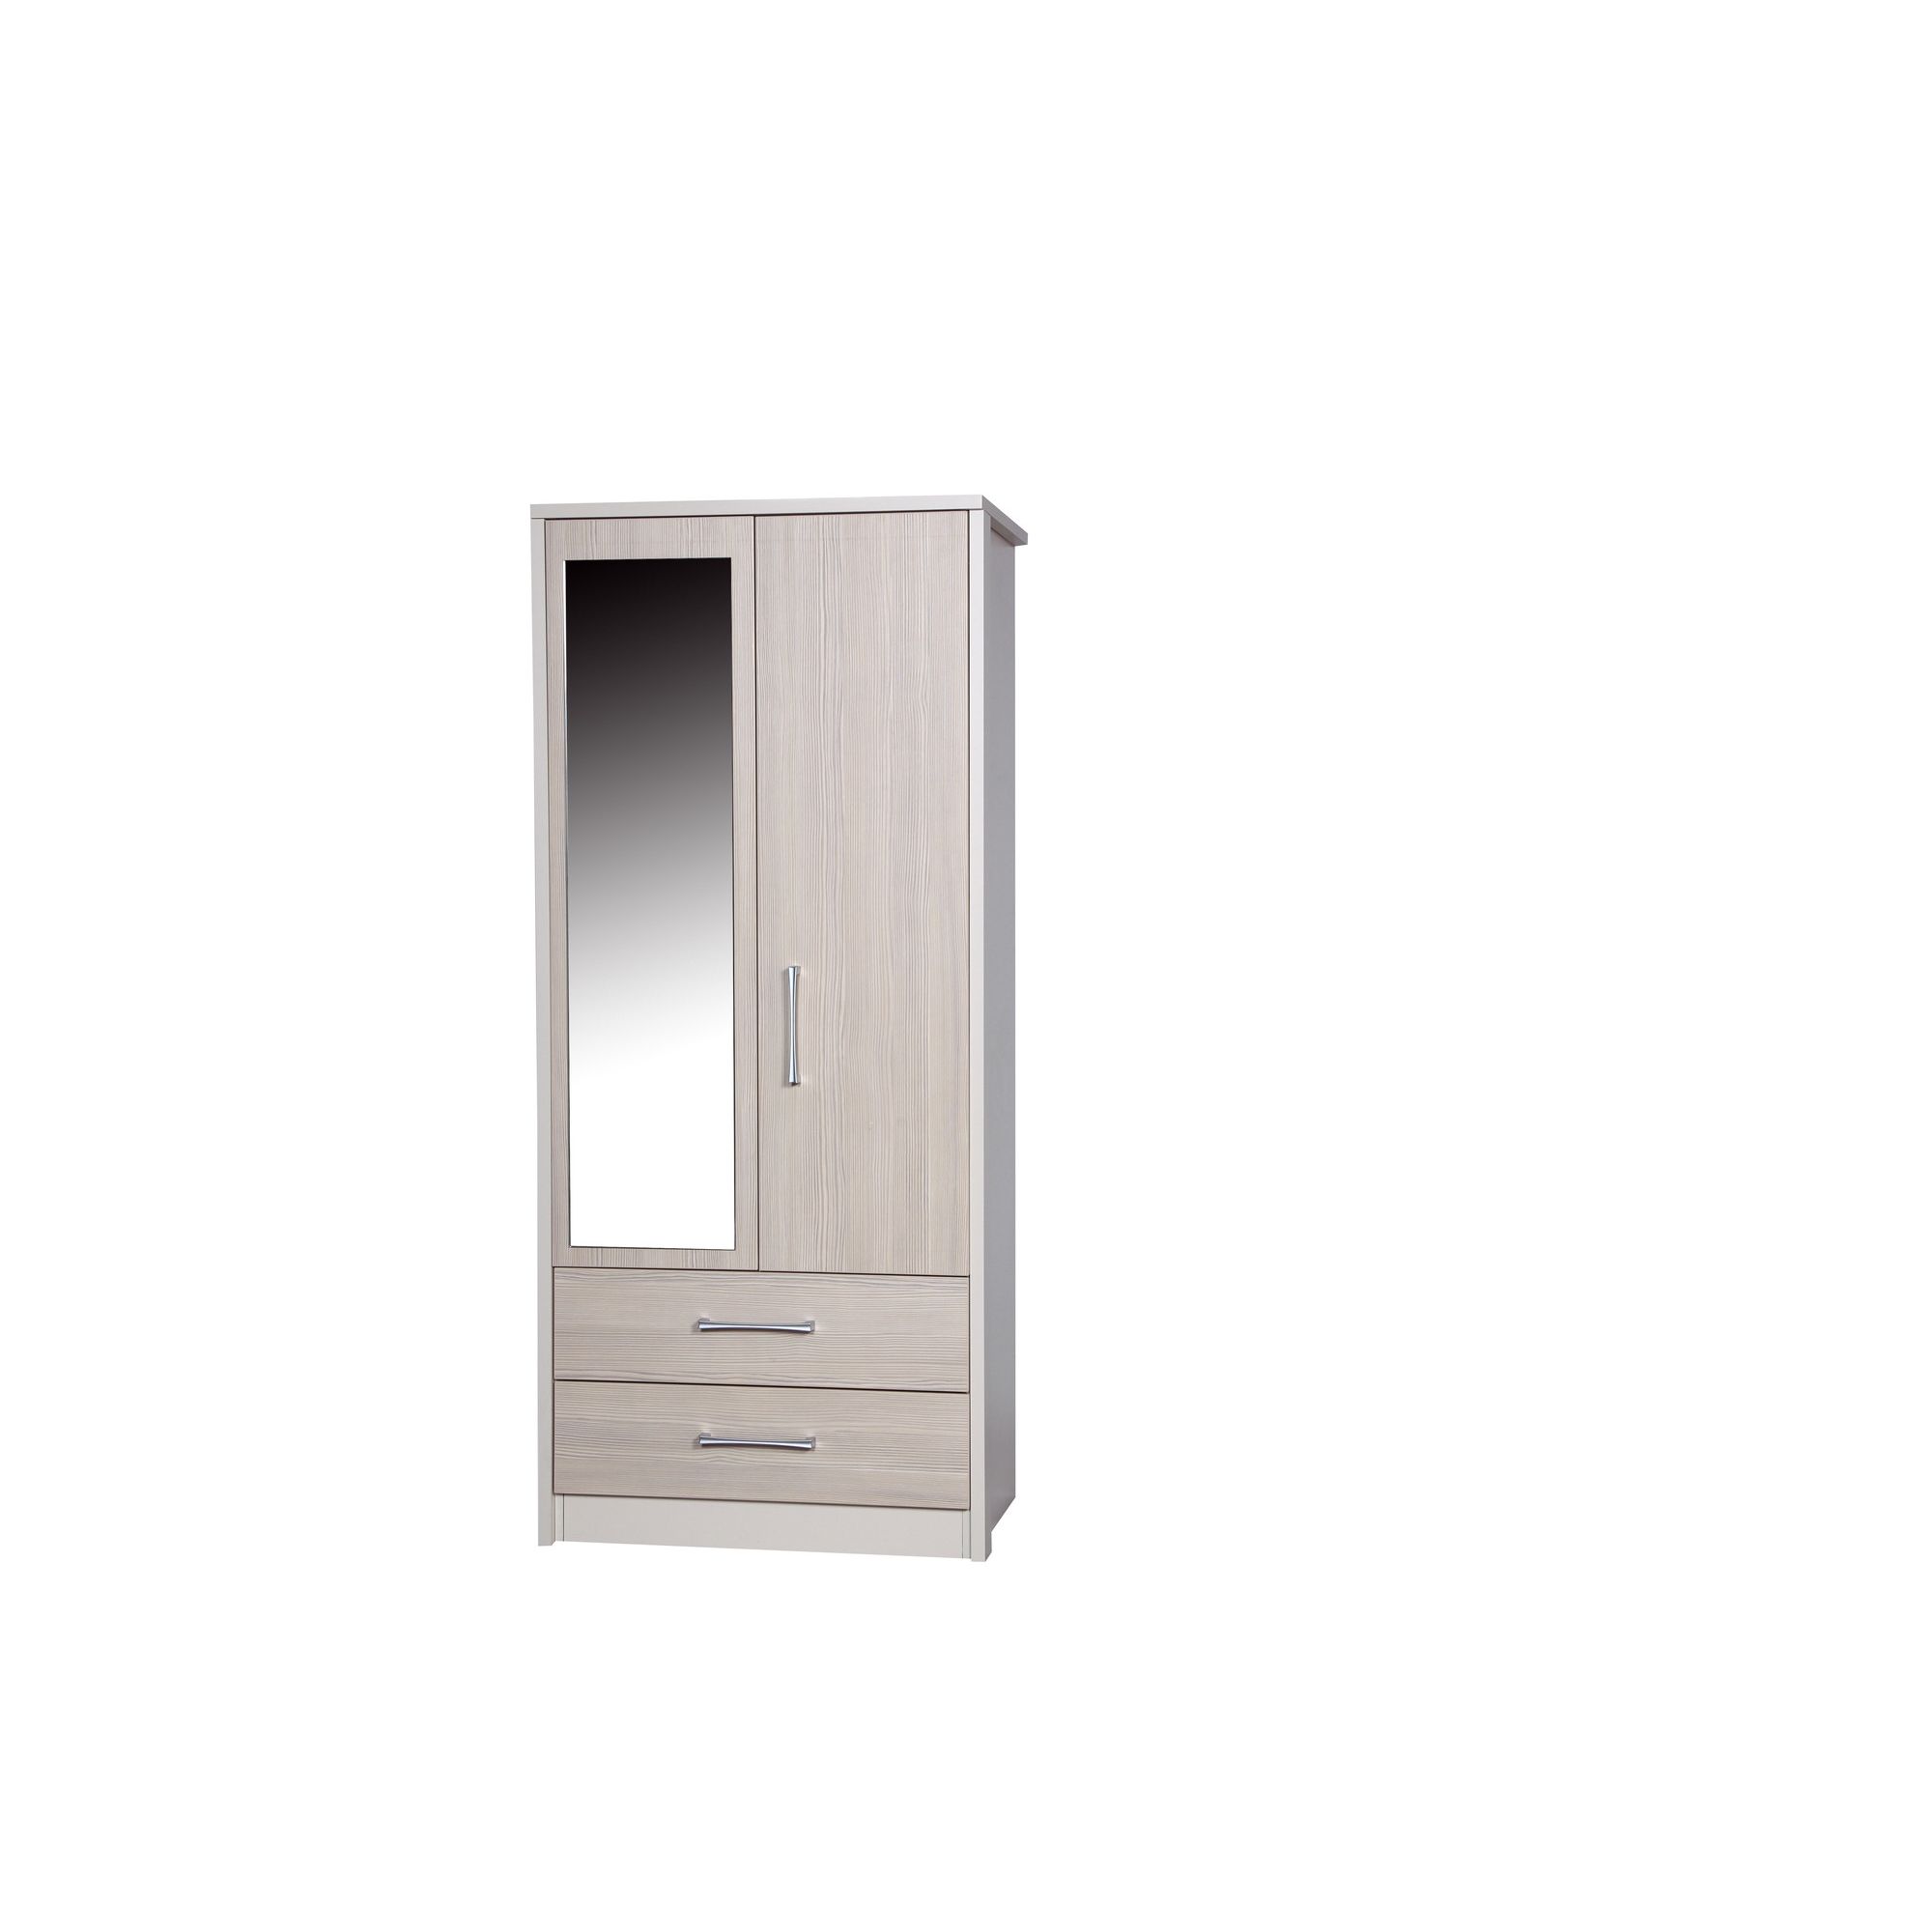 Alto Furniture Avola 2 Drawer Combi Wardrobe with Mirror - Cream Carcass With Champagne Avola at Tesco Direct